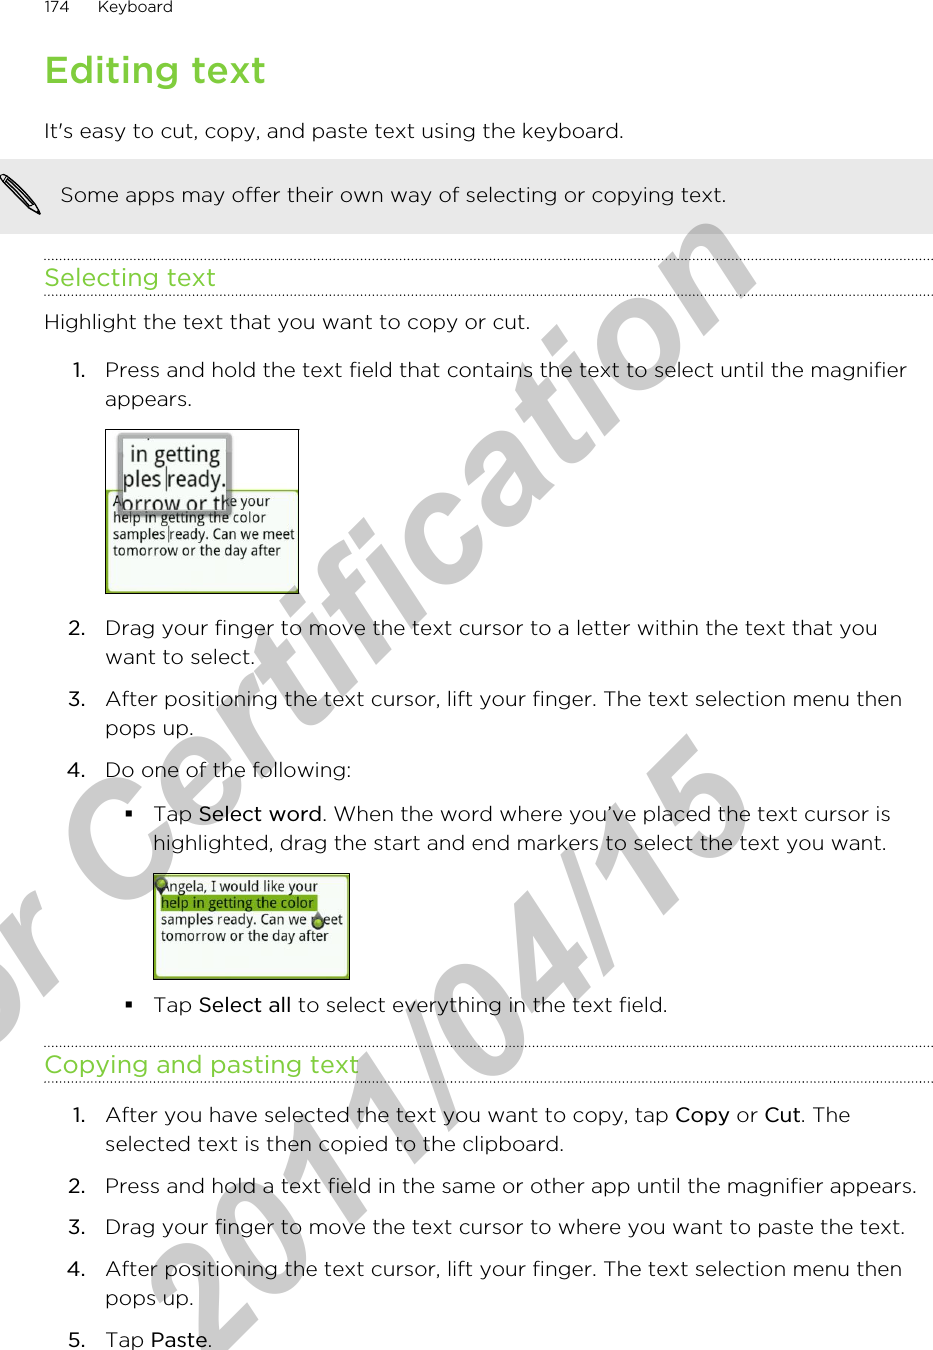 Editing textIt&apos;s easy to cut, copy, and paste text using the keyboard.Some apps may offer their own way of selecting or copying text.Selecting textHighlight the text that you want to copy or cut.1. Press and hold the text field that contains the text to select until the magnifierappears. 2. Drag your finger to move the text cursor to a letter within the text that youwant to select.3. After positioning the text cursor, lift your finger. The text selection menu thenpops up.4. Do one of the following:§Tap Select word. When the word where you’ve placed the text cursor ishighlighted, drag the start and end markers to select the text you want.§Tap Select all to select everything in the text field.Copying and pasting text1. After you have selected the text you want to copy, tap Copy or Cut. Theselected text is then copied to the clipboard.2. Press and hold a text field in the same or other app until the magnifier appears.3. Drag your finger to move the text cursor to where you want to paste the text.4. After positioning the text cursor, lift your finger. The text selection menu thenpops up.5. Tap Paste.174 Keyboardfor Certification  2011/04/15